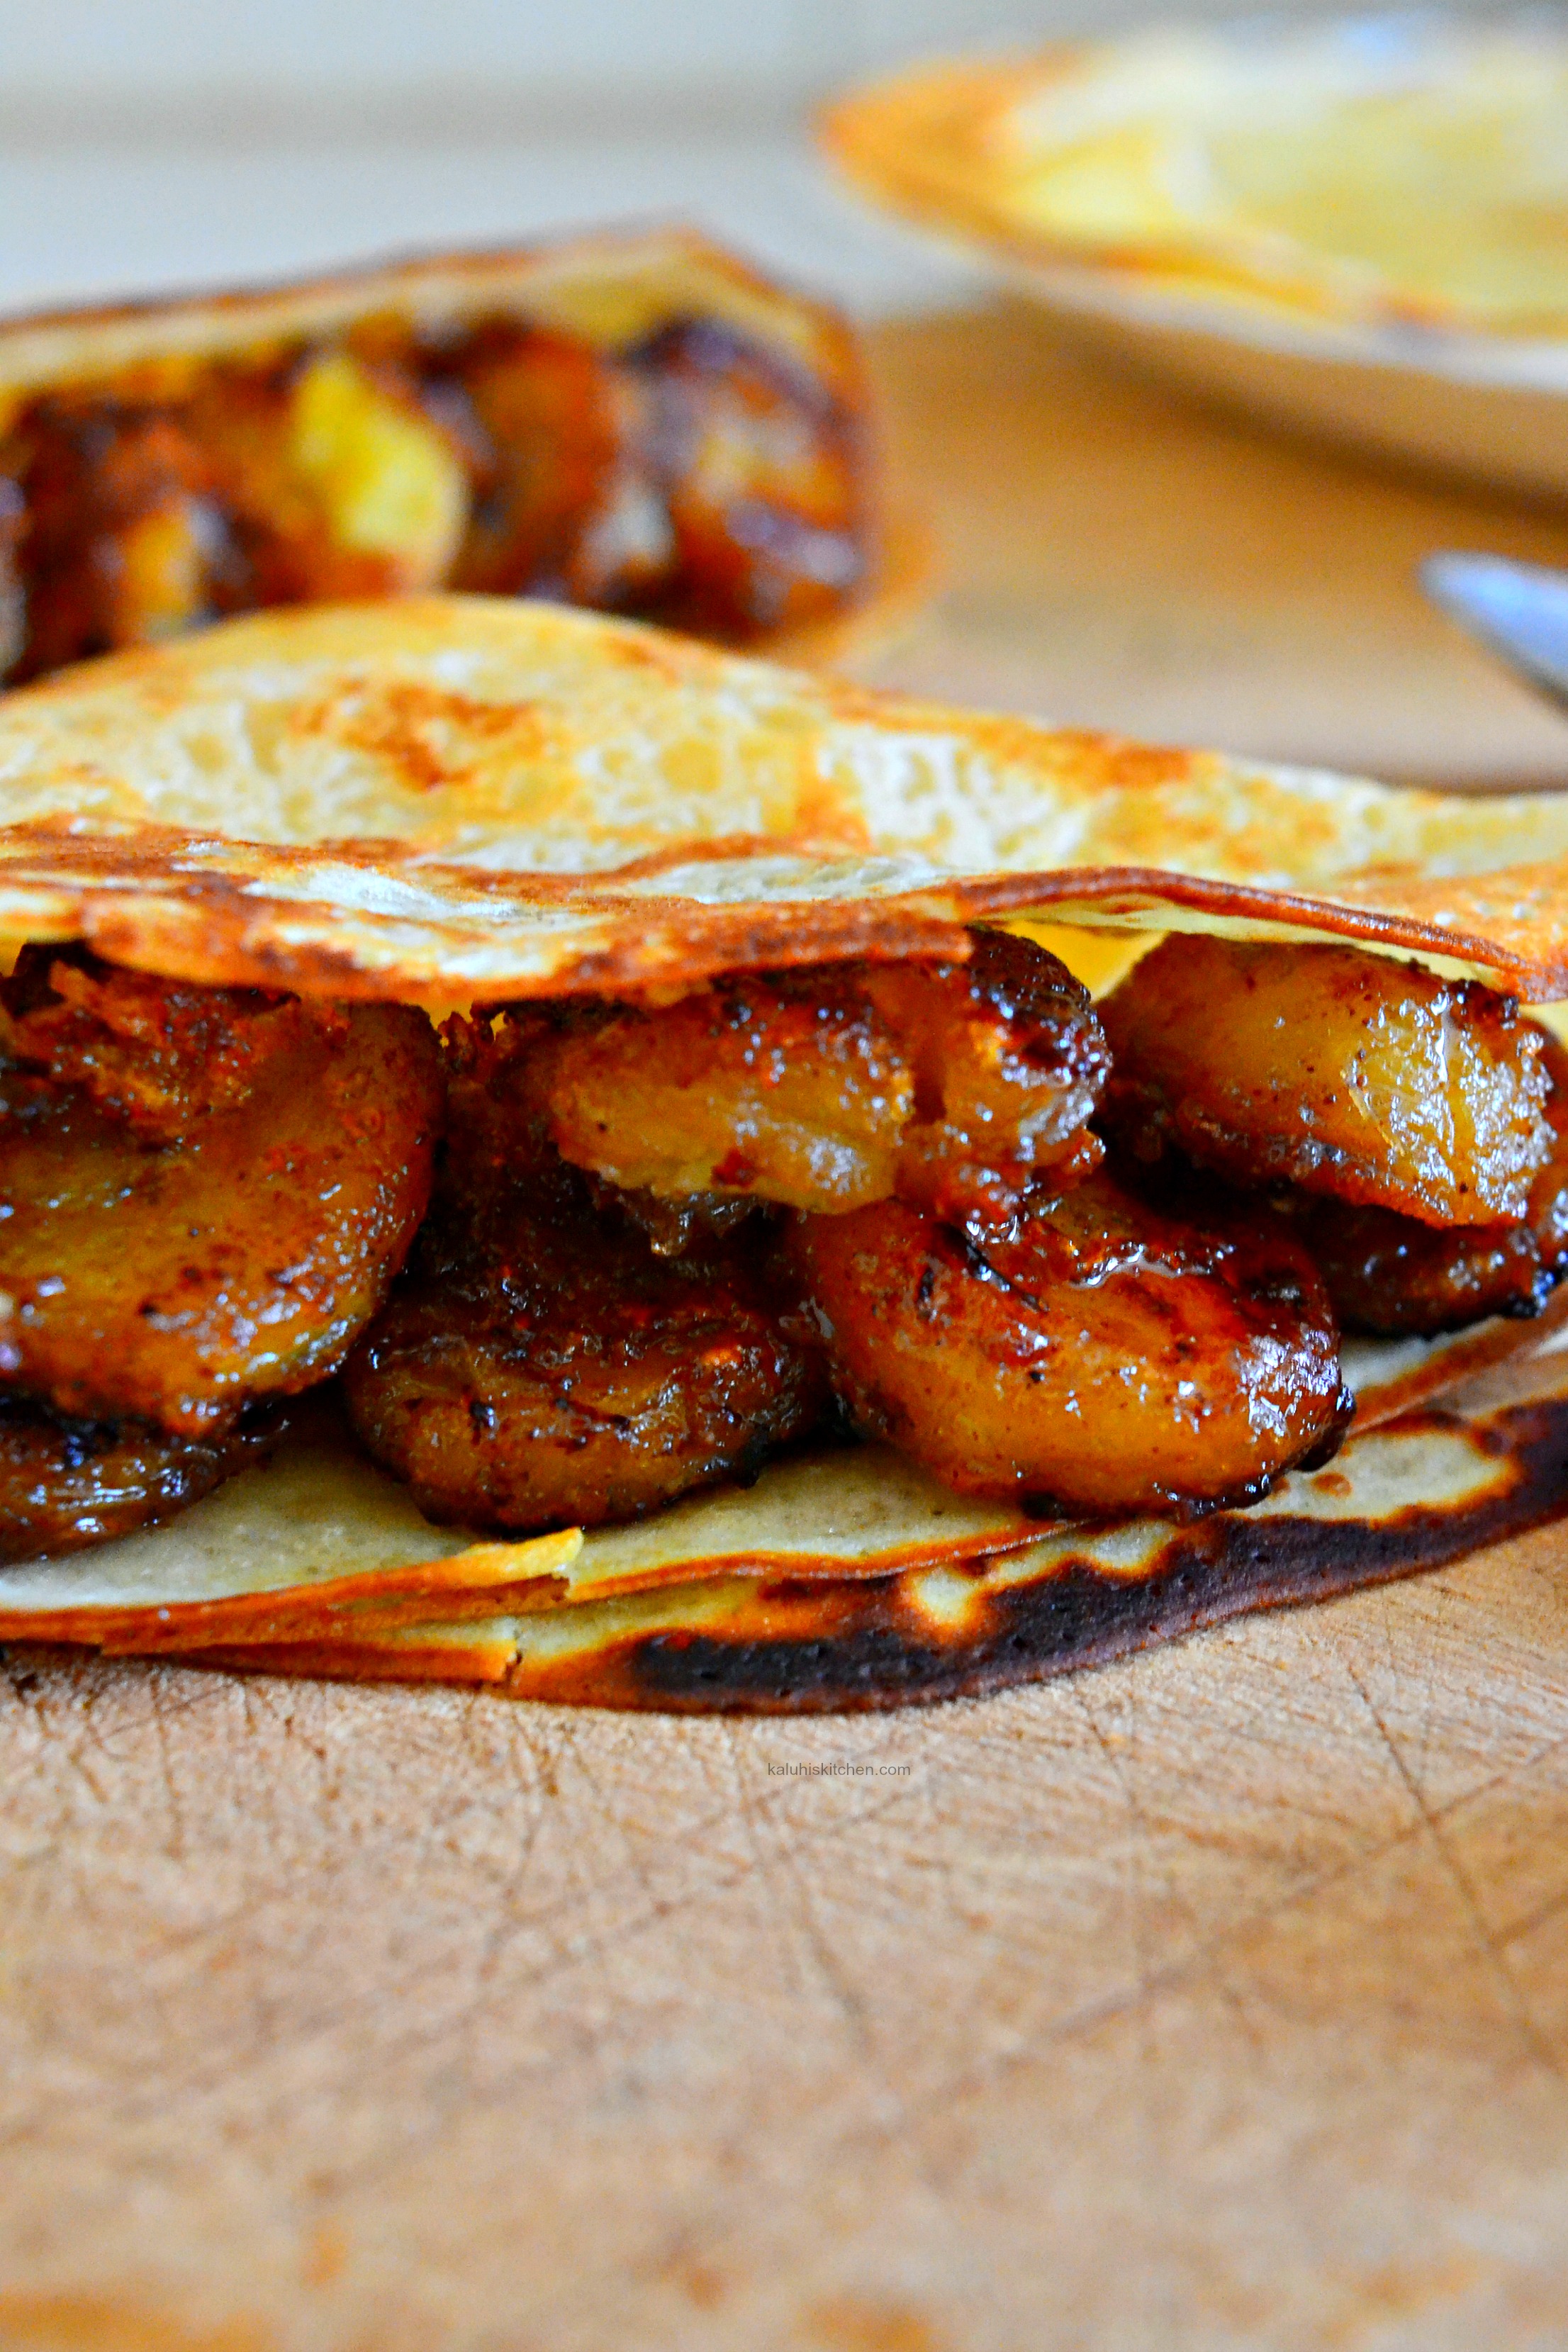 fold-your-crepes-into-quarters-and-stuff-your-caramelized-bananas-into-the-cavity_kaluhiskitchen-com